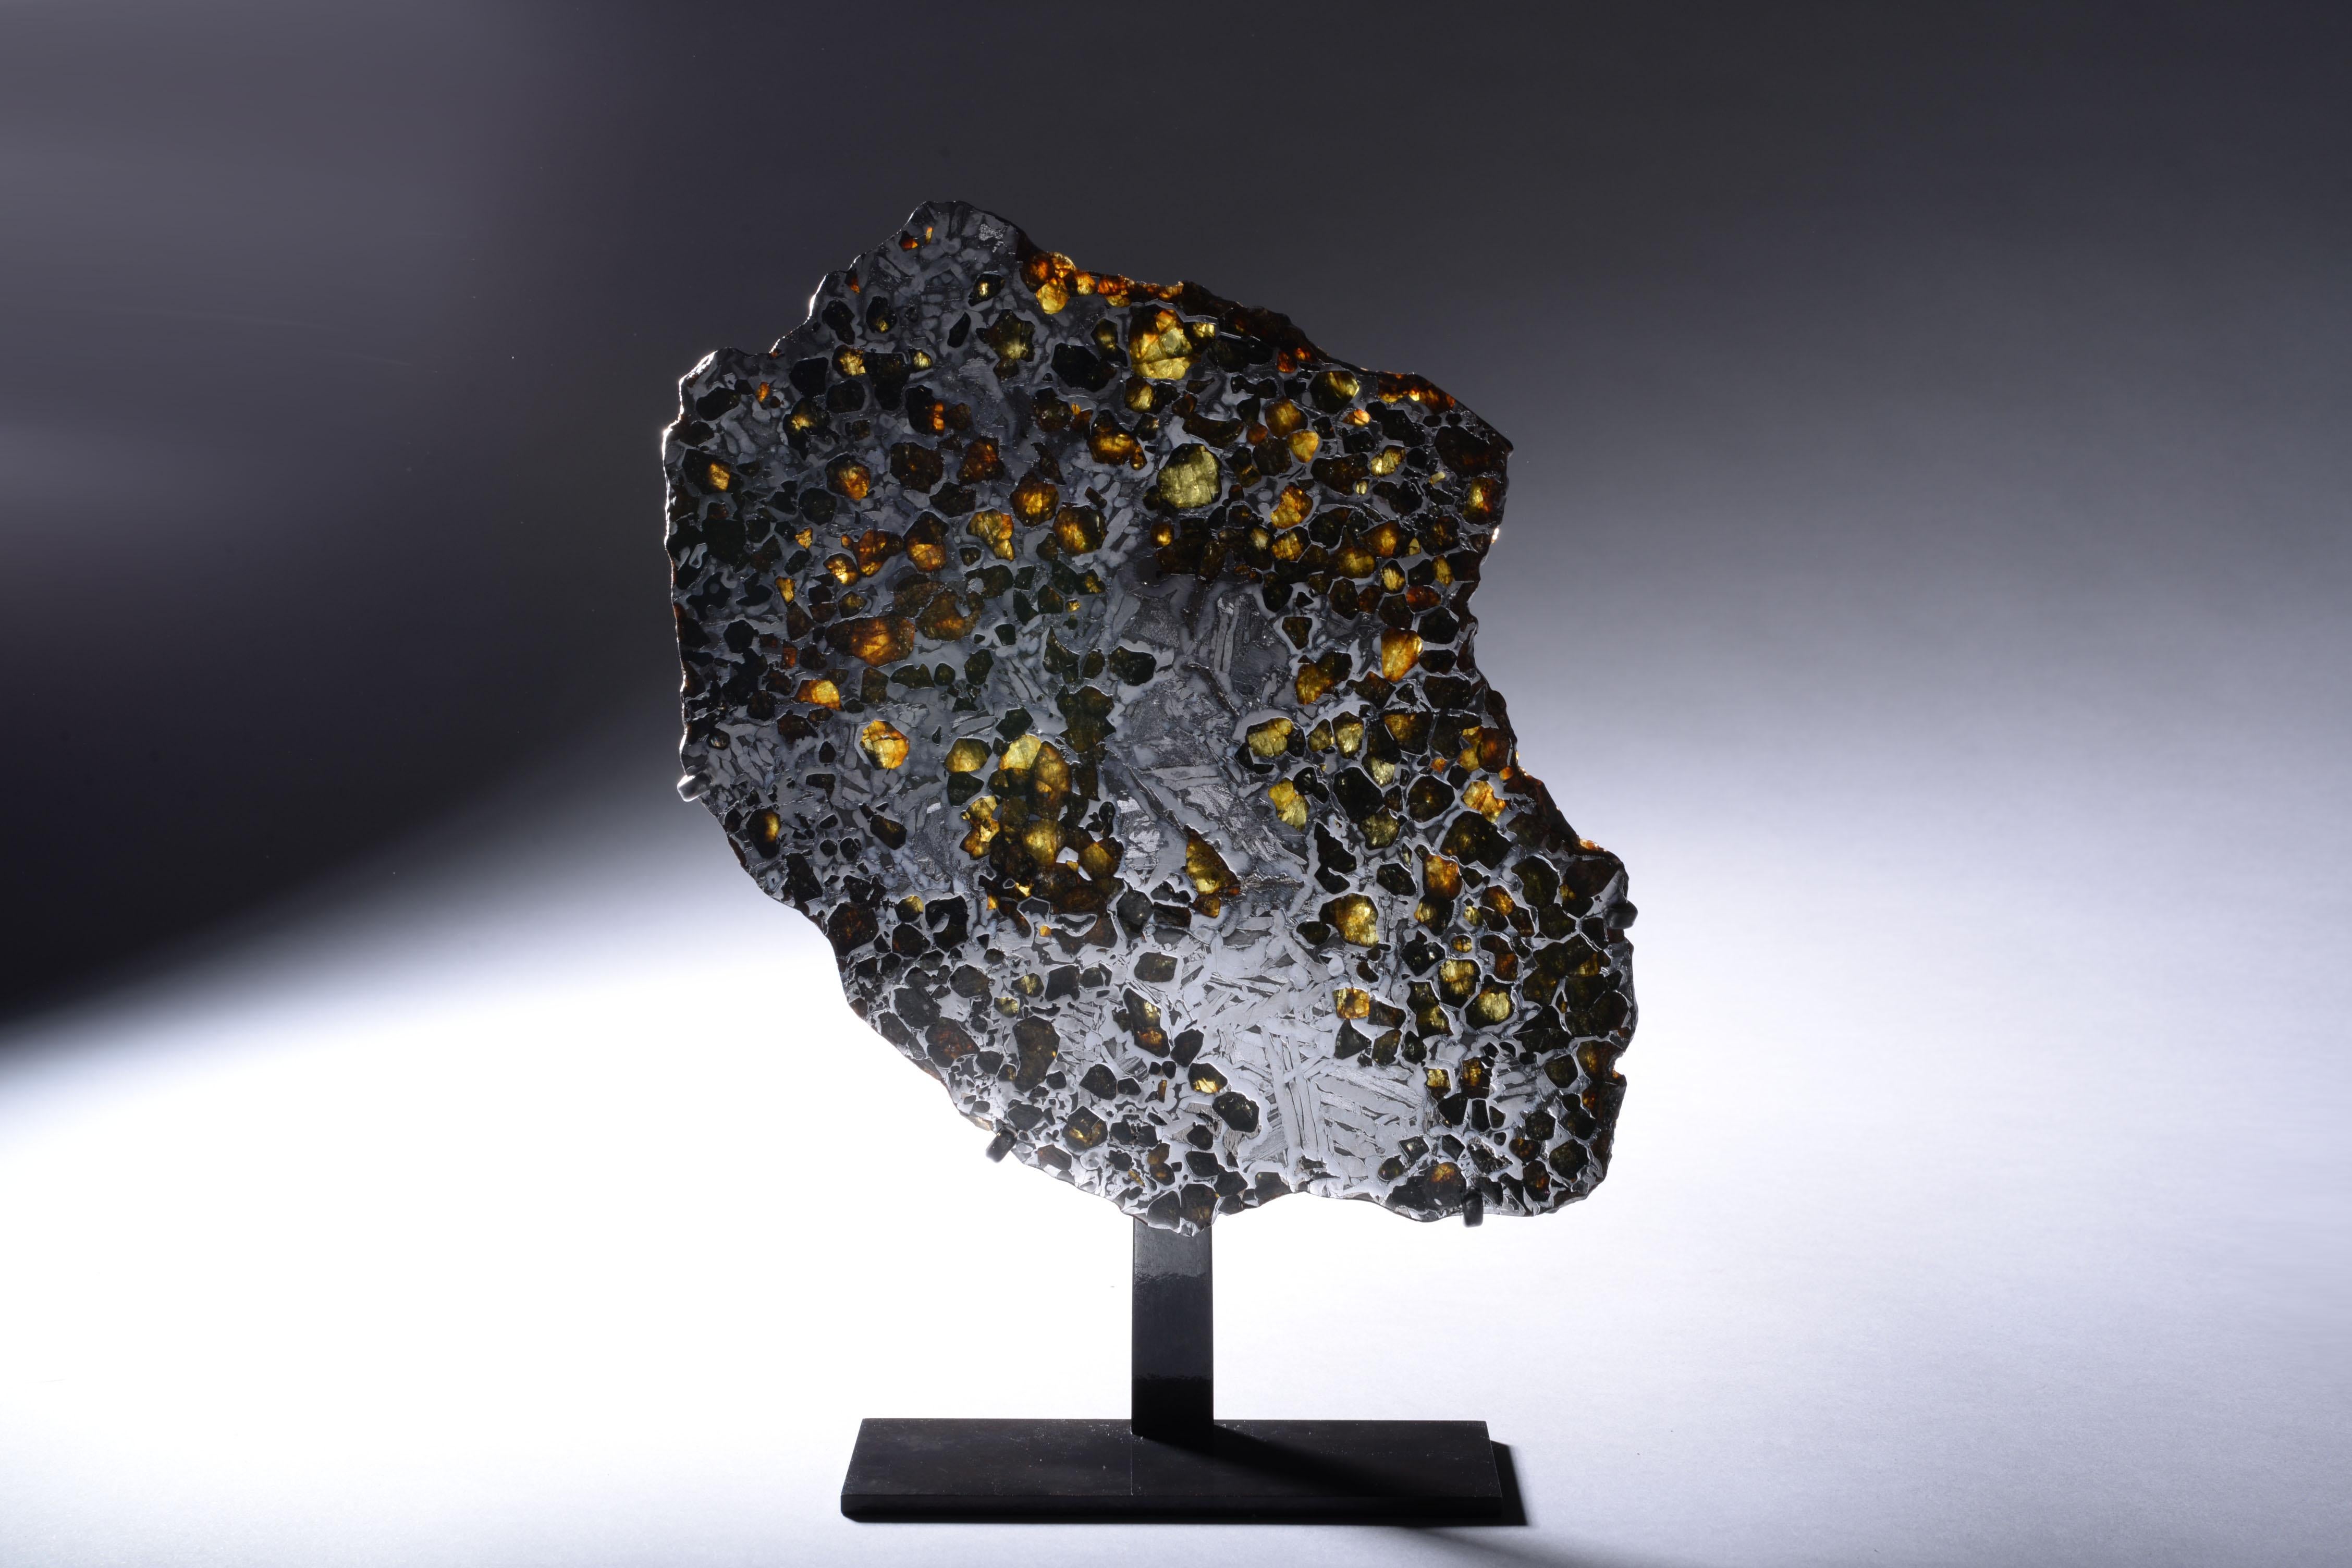 Cross Section from the Seymchan Meteorite
Pallasite

Comprising less than 0.2% of all meteorites, pallasites, made up of an iron-nickel matrix interwoven with amber-coloured olivine gemstones, are perhaps the most dazzling meteorites of all. This